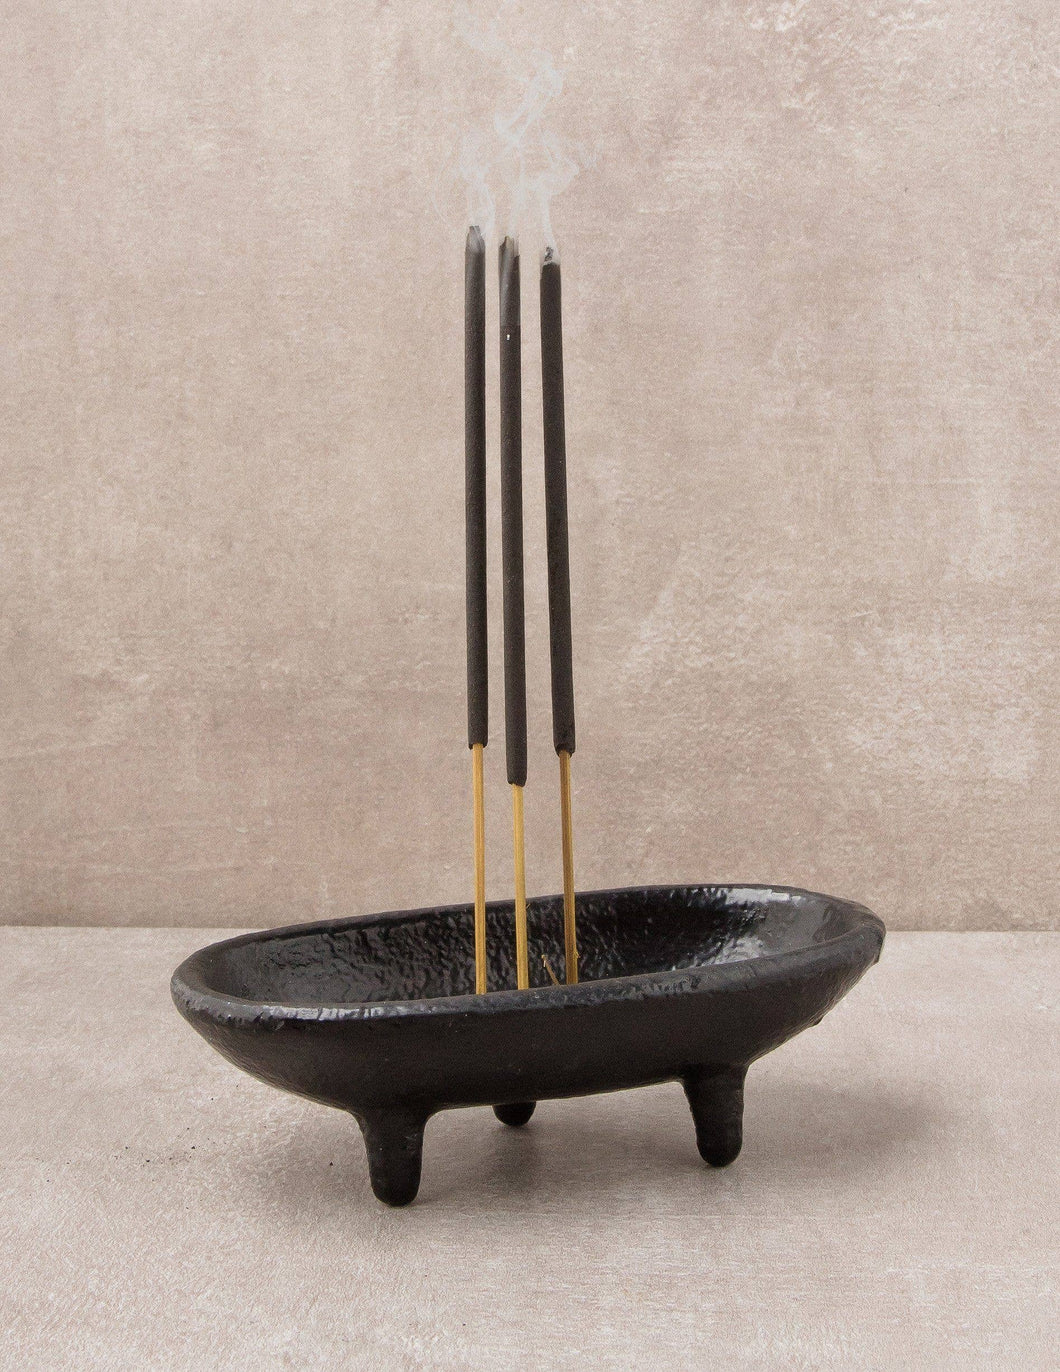 Convertible Cast Iron Incense Burner: Canoe-shaped Holder for Incense Sticks and Purification